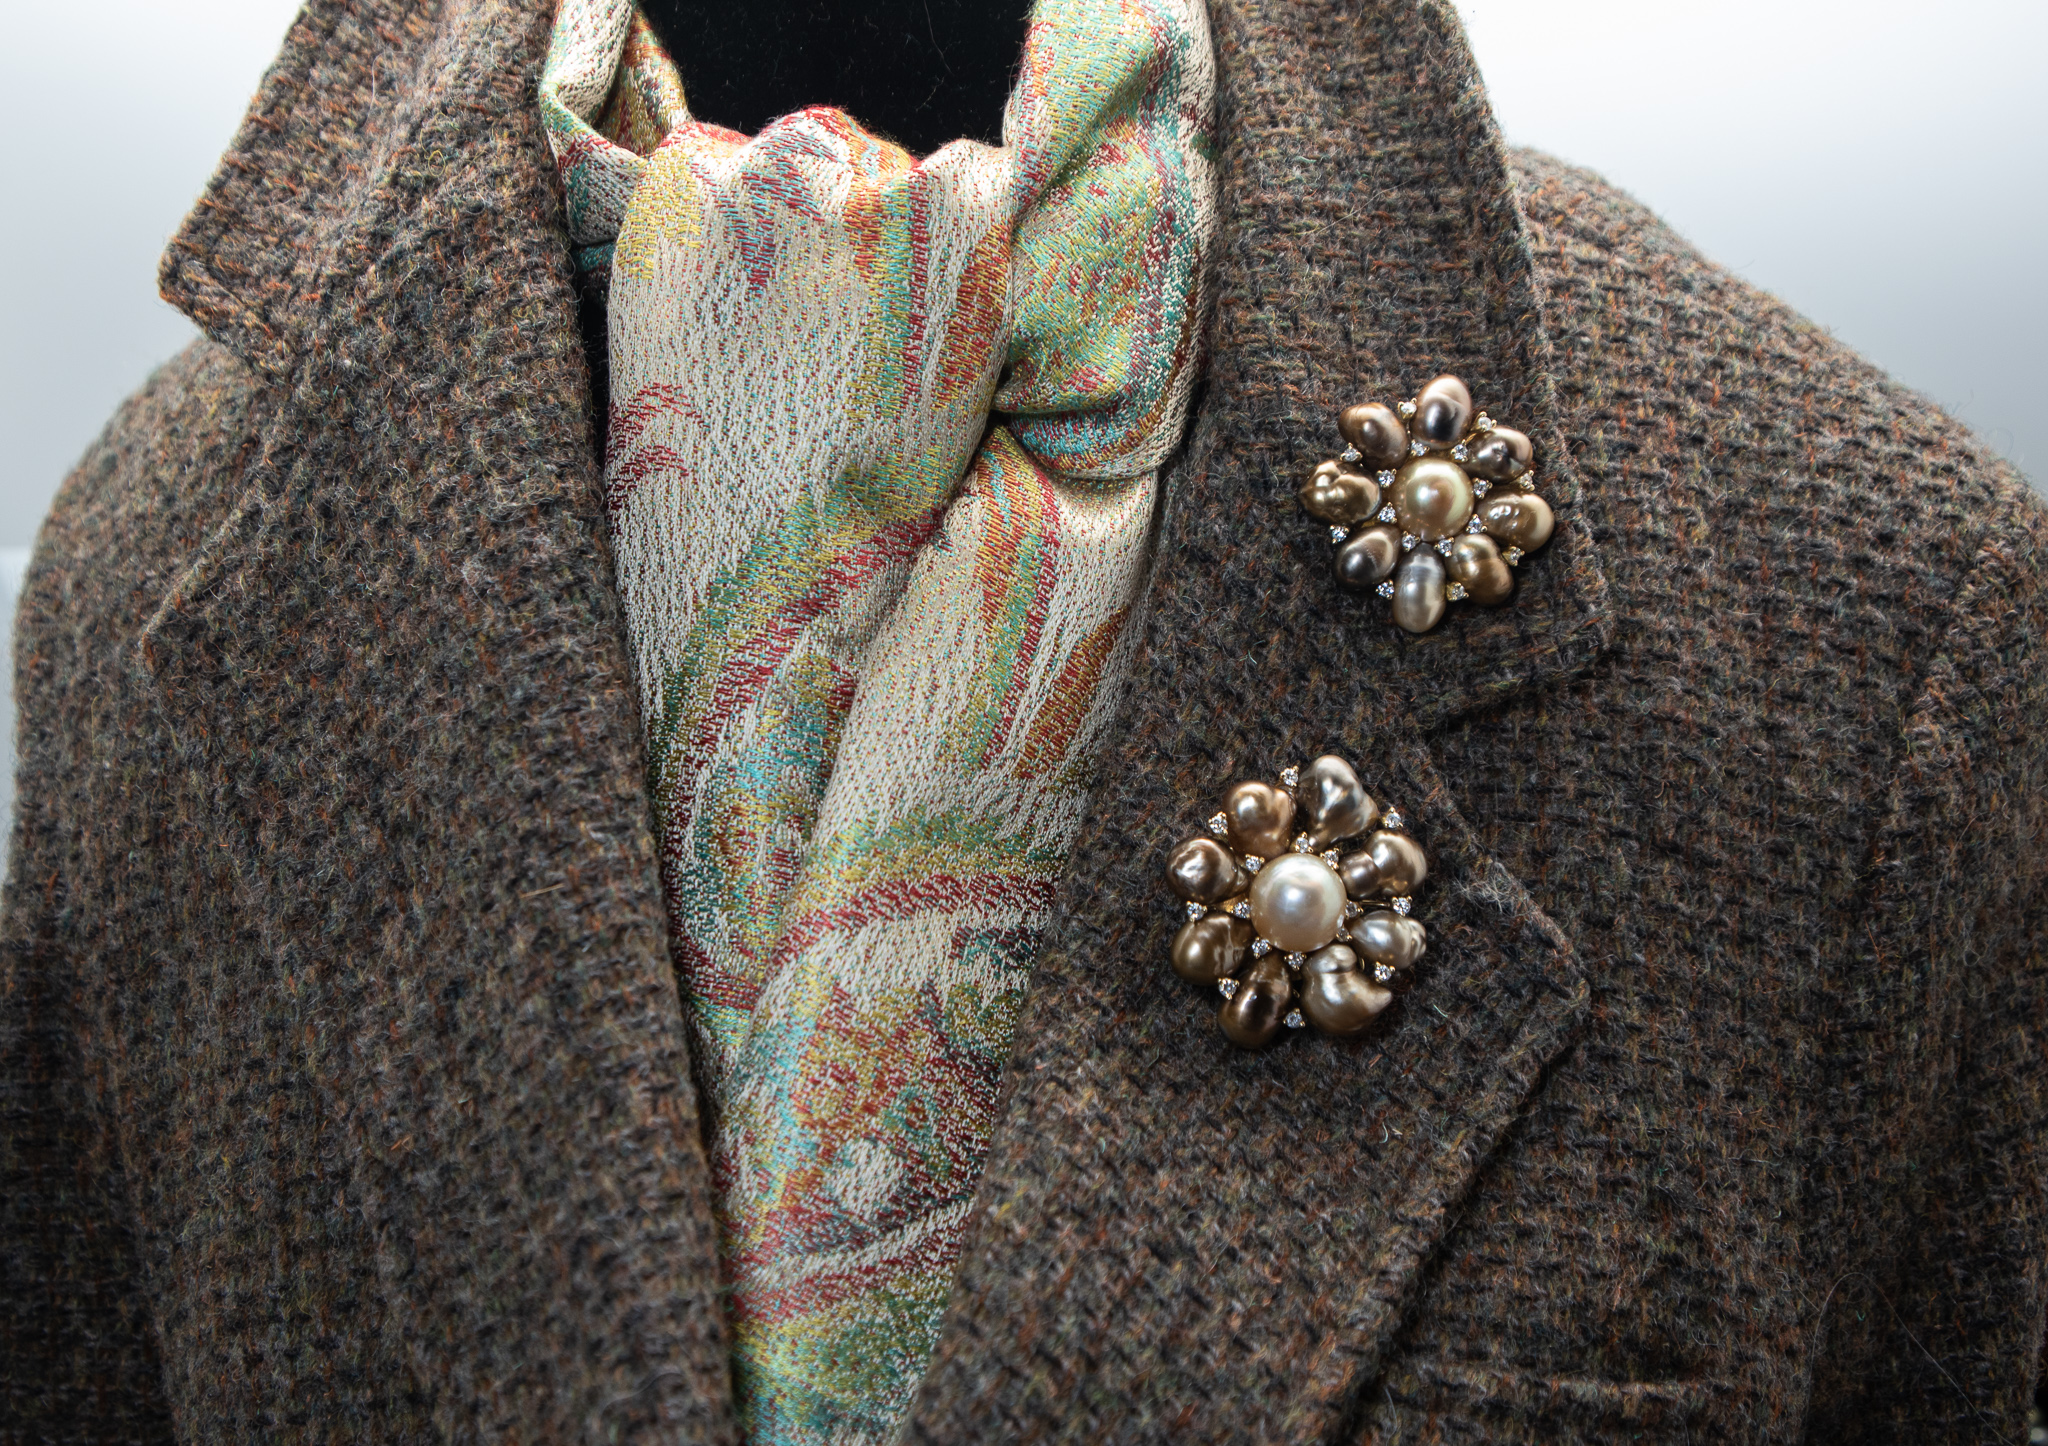 Two large Tahitian pearl brooches pinned to the lapel of a tweed blazer with silk scarf